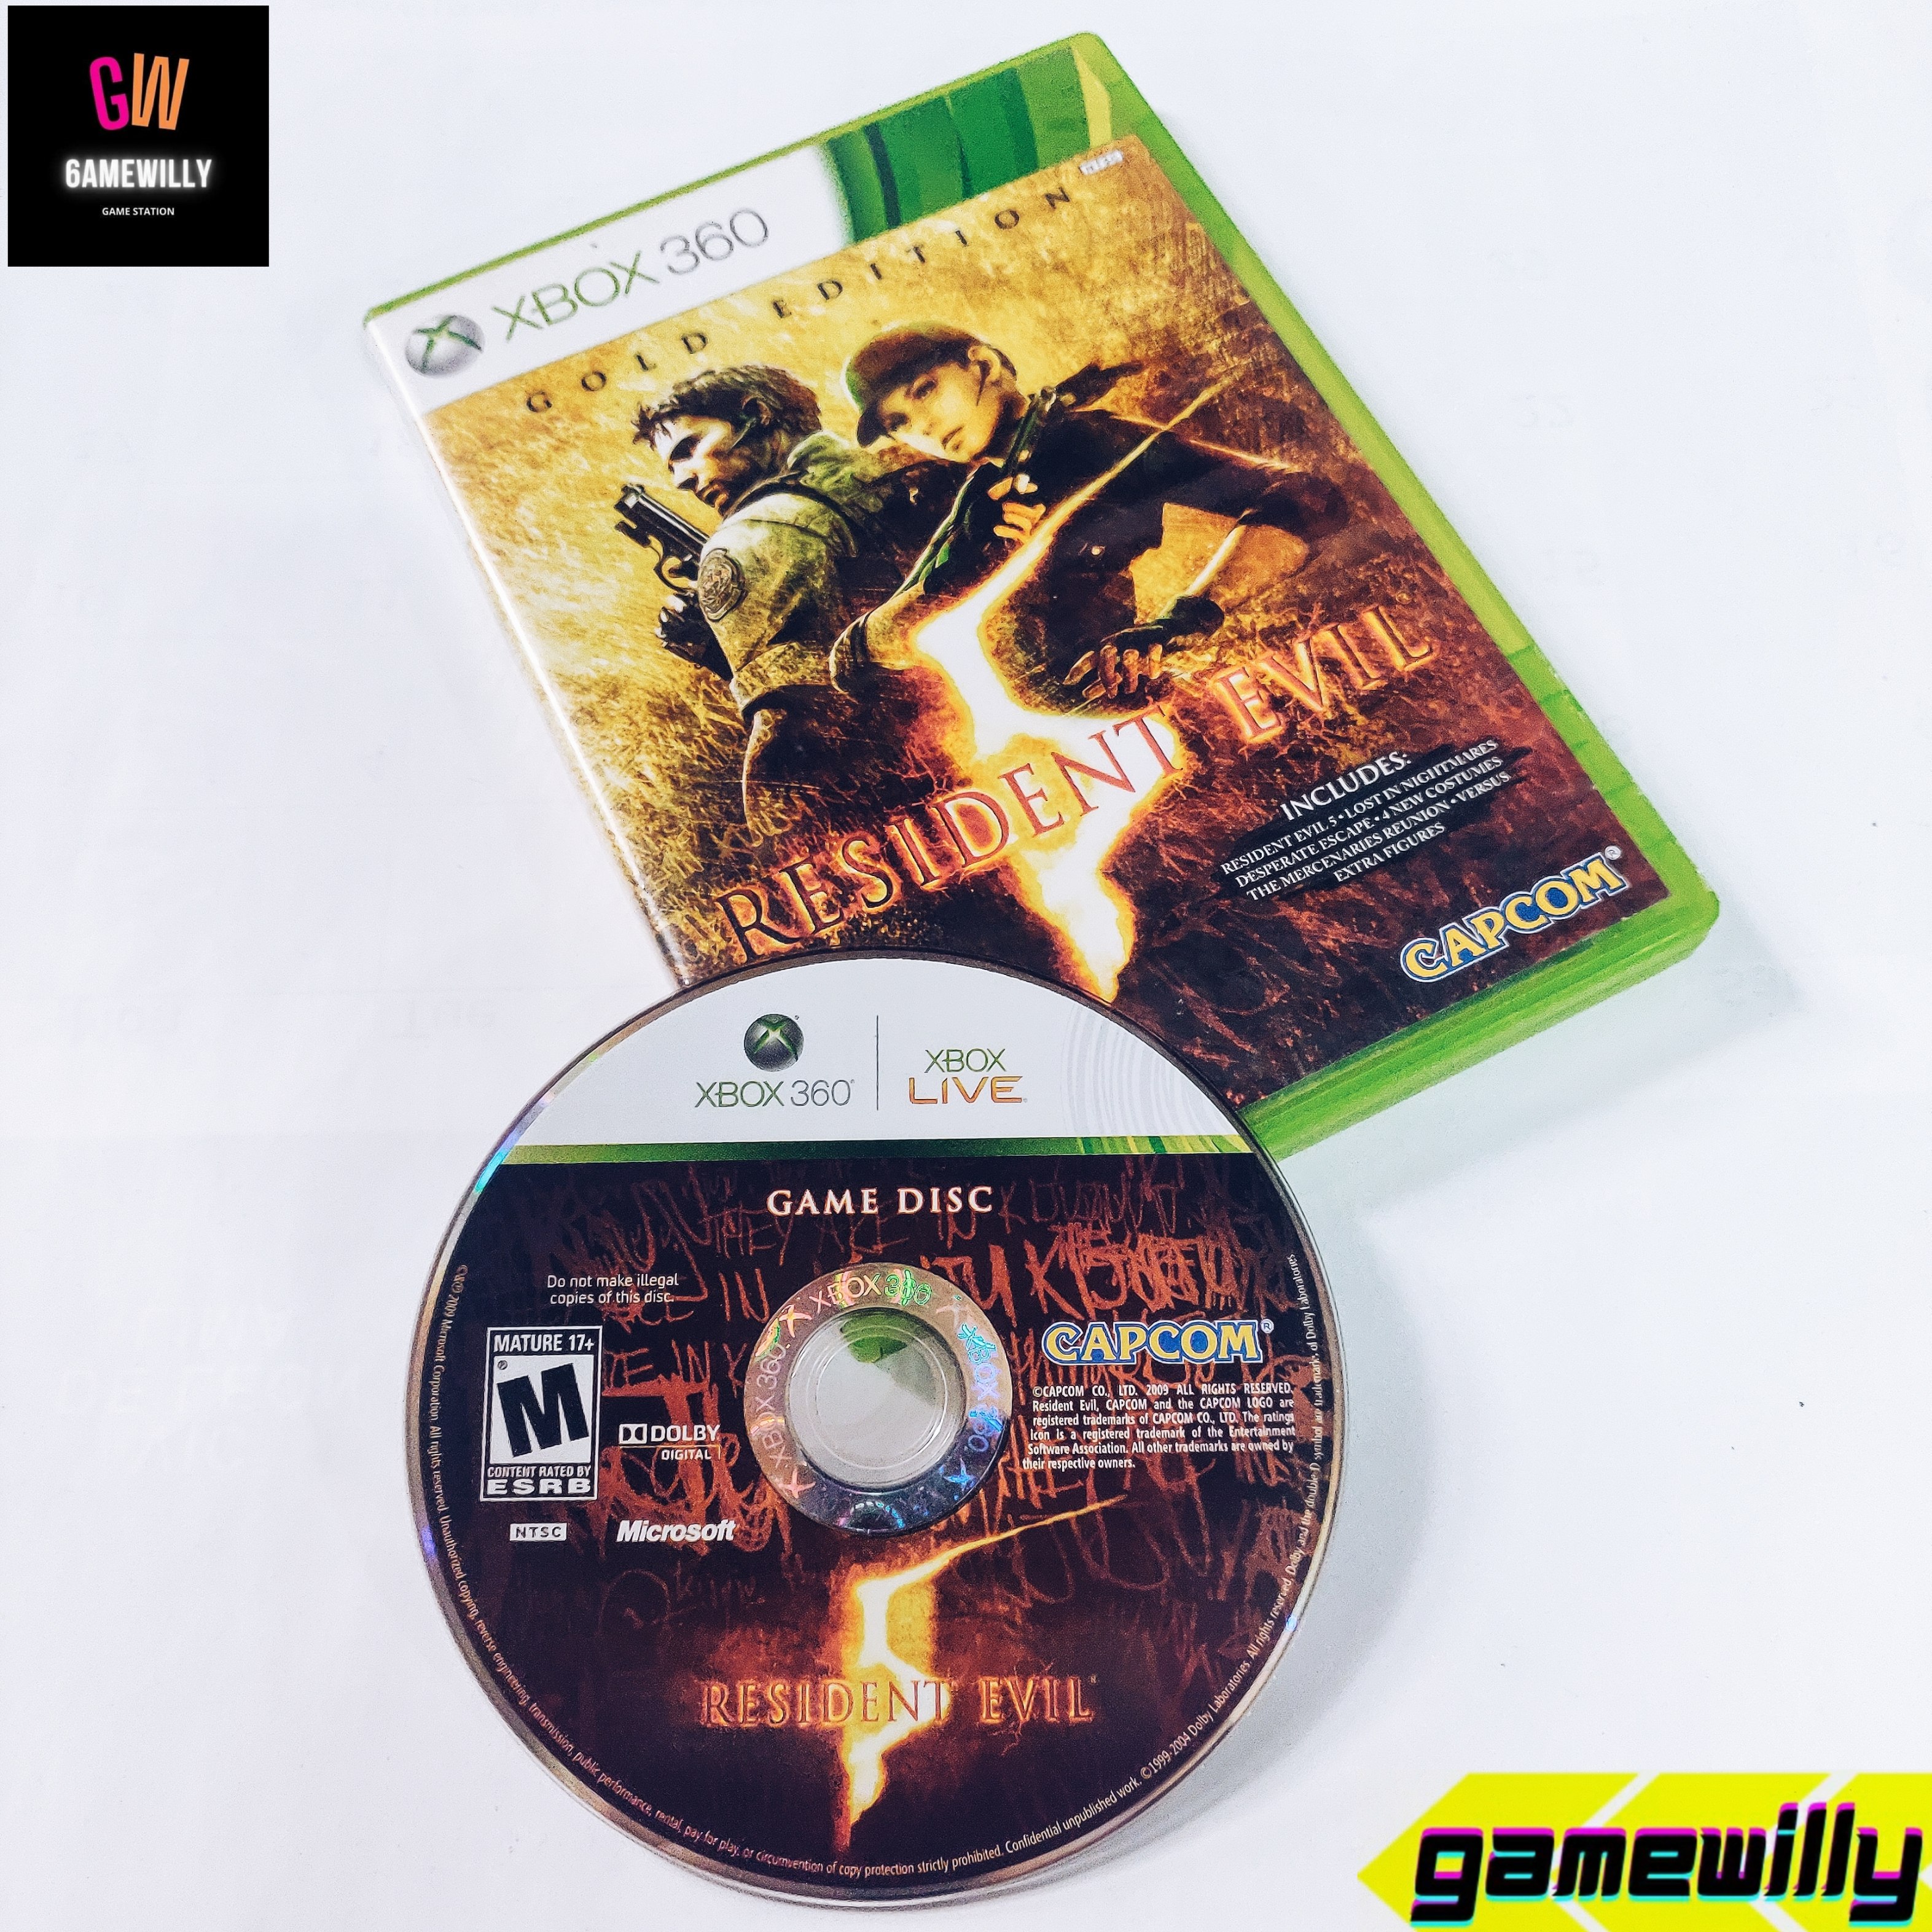 Resident Evil 5: Gold Edition - Xbox 360